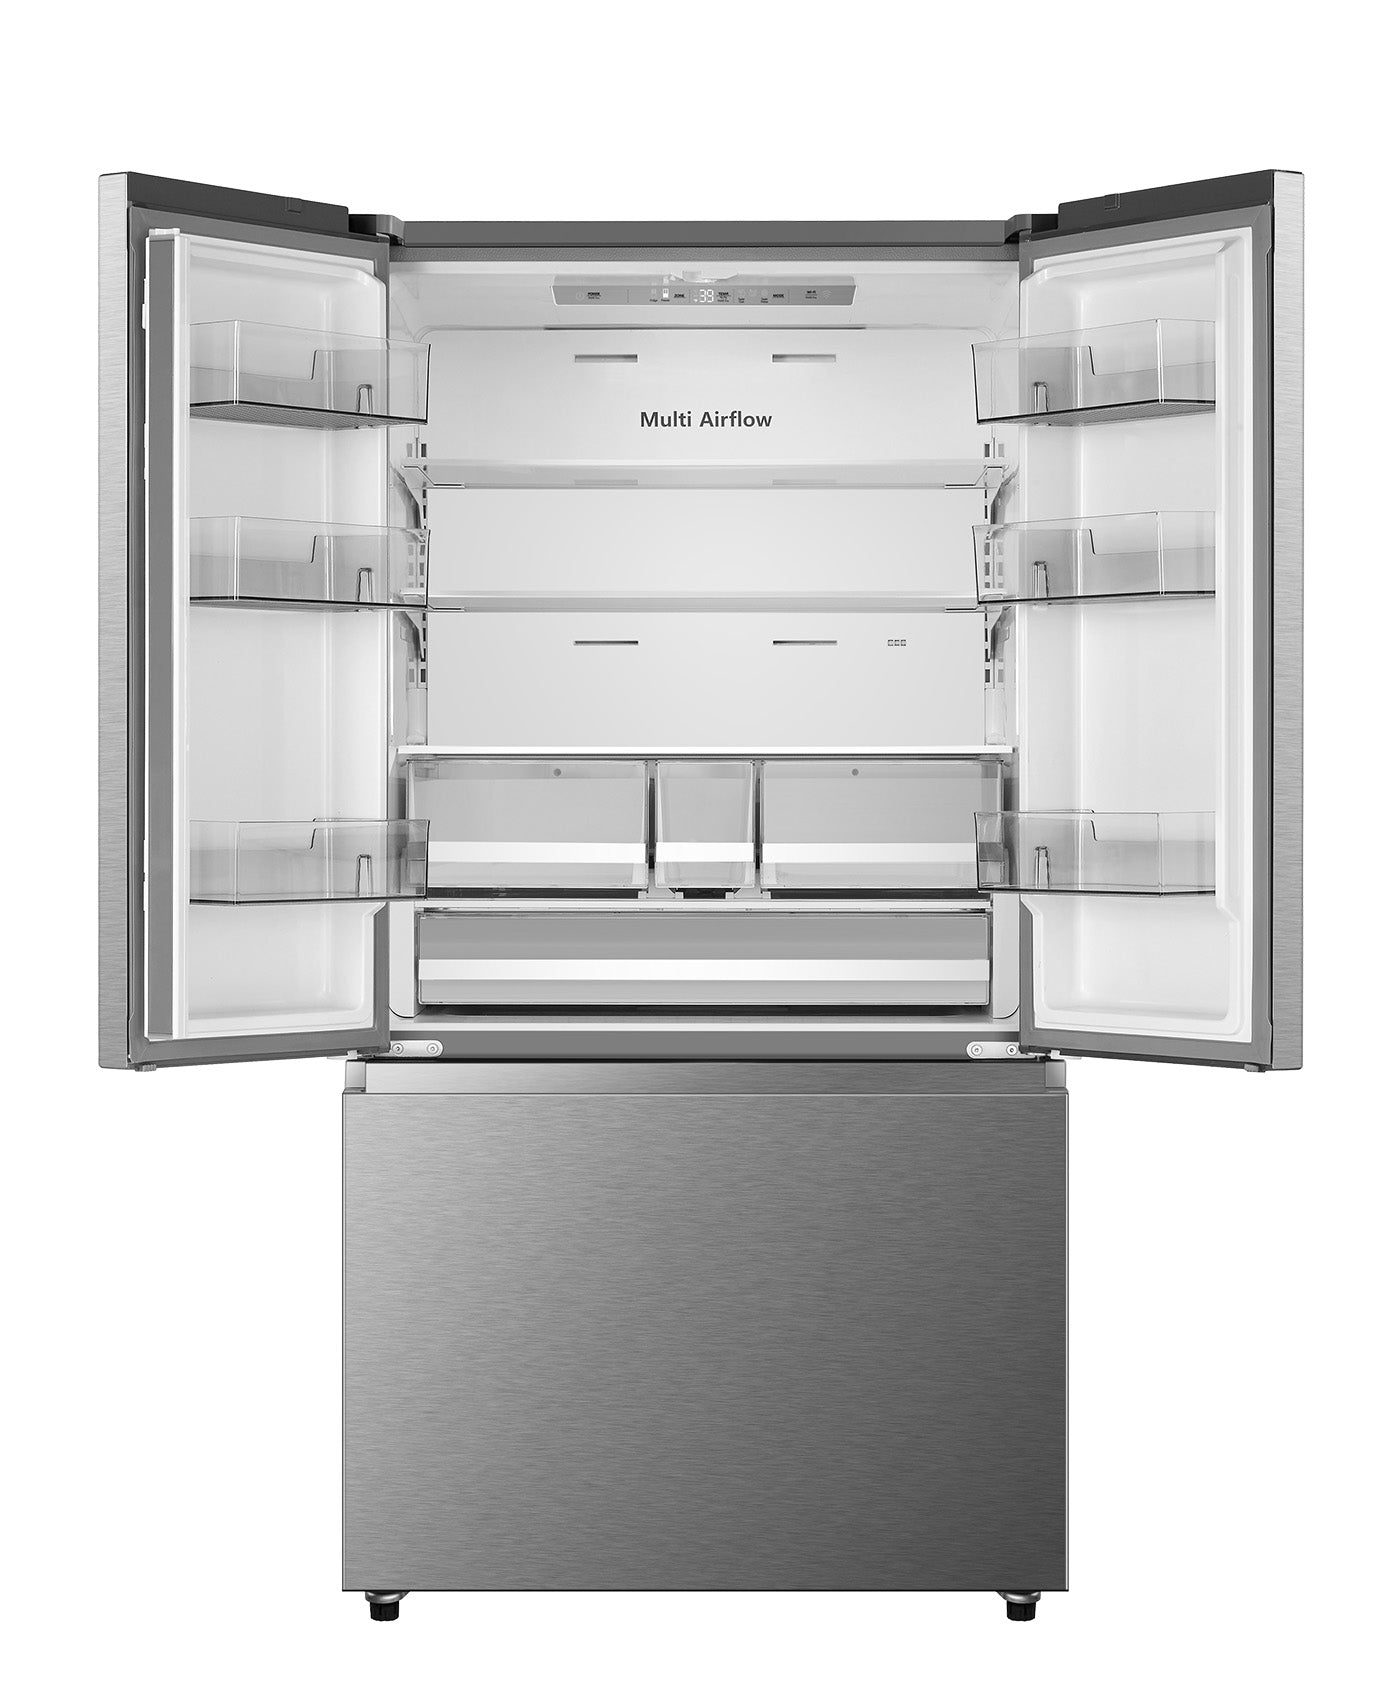 Hisense - 35.98 Inch 22.5 cu. ft French Door Refrigerator in Stainless - RF225A3CSE